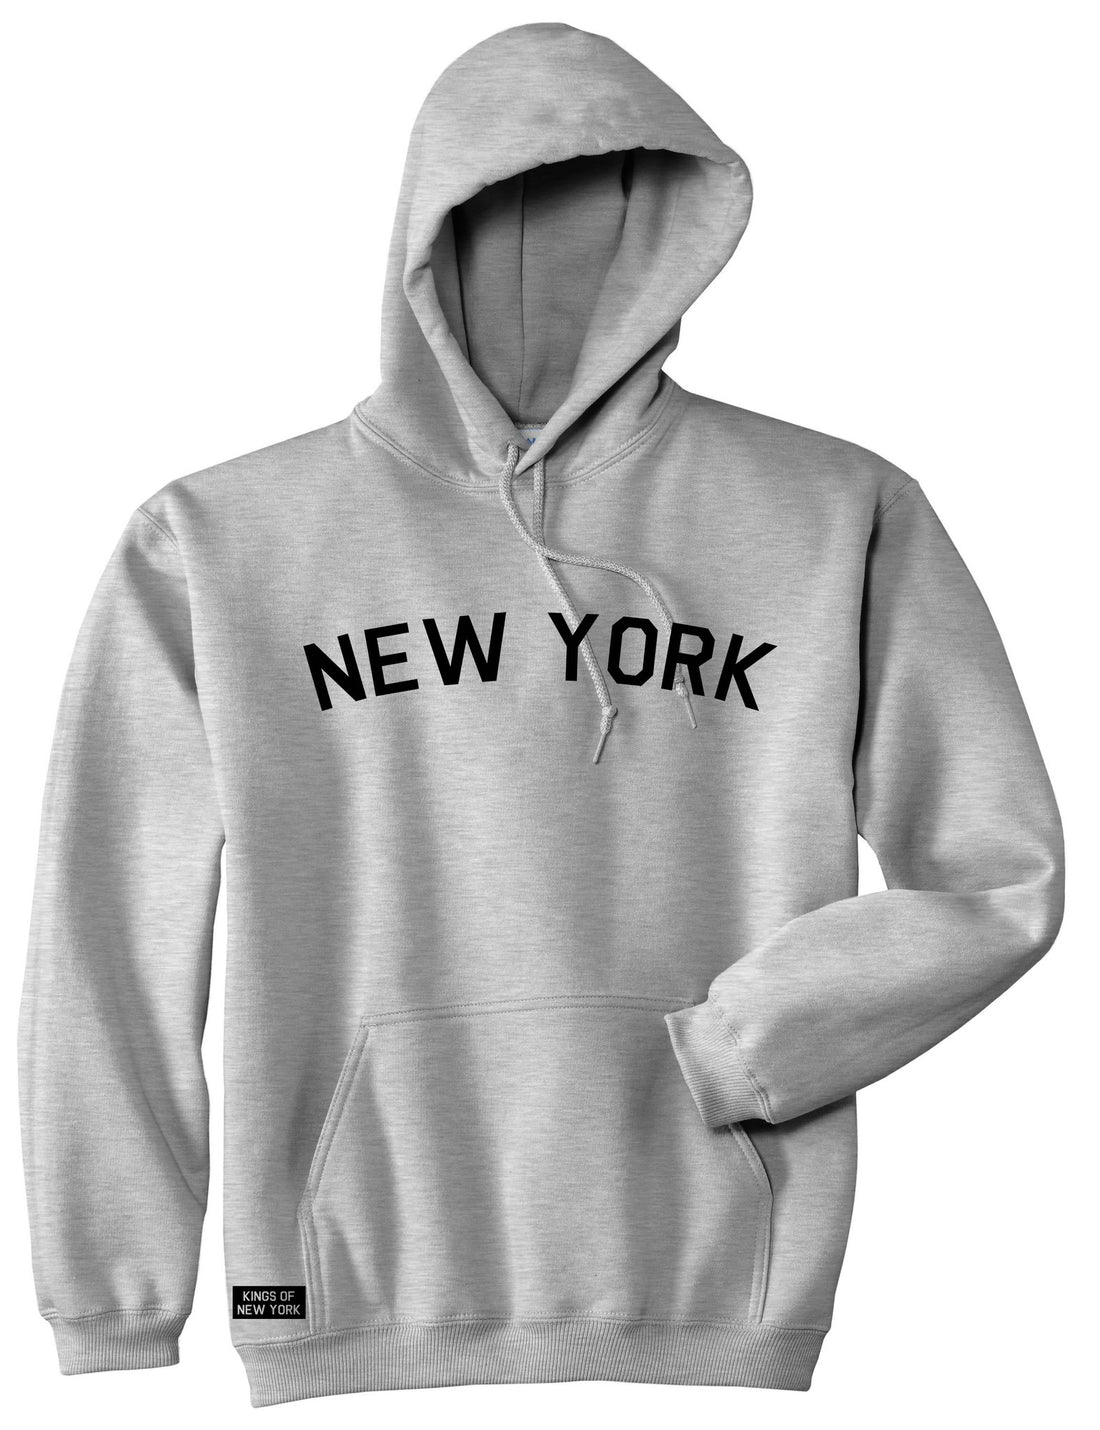 New York Arch Pullover Hoodie Hoody in Grey by Kings Of NY